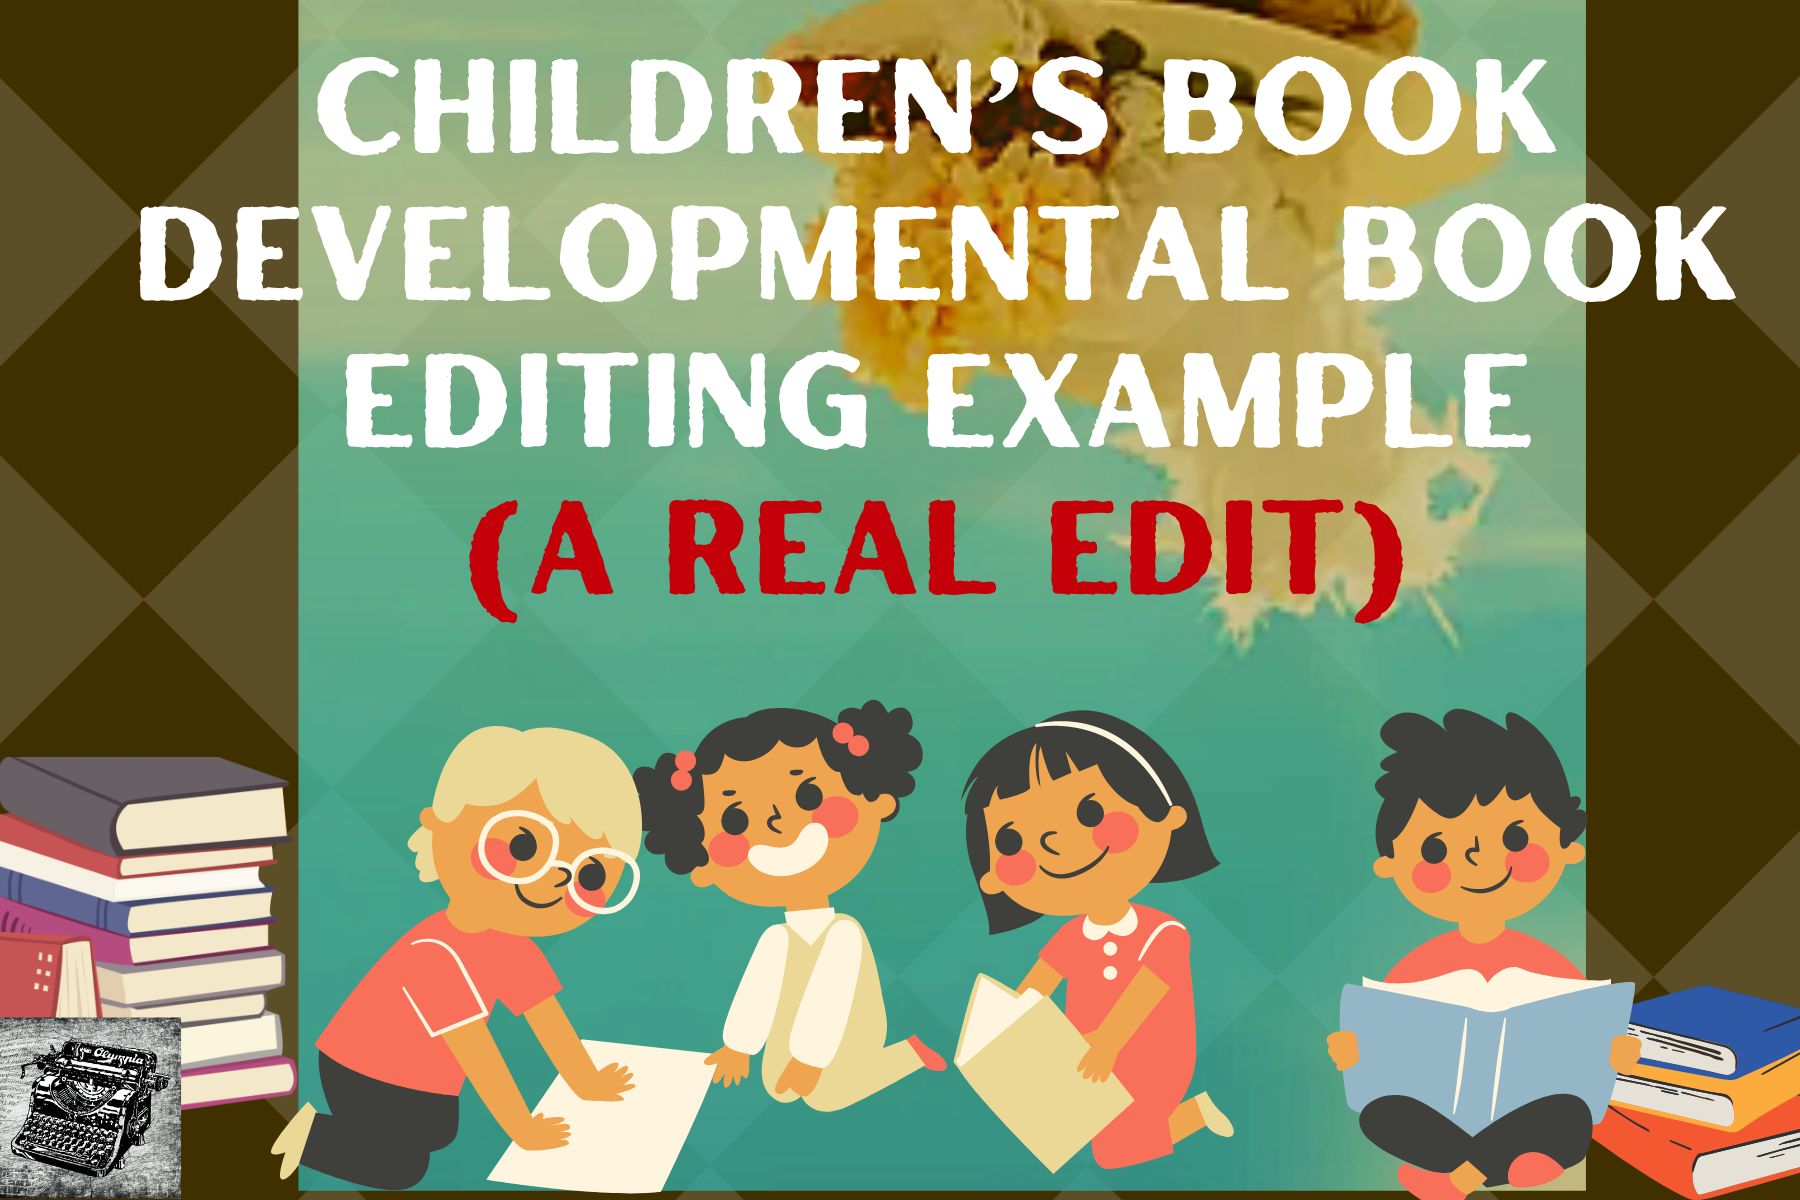 childrens book editor, editing your kids book, how to write for kids, editing example